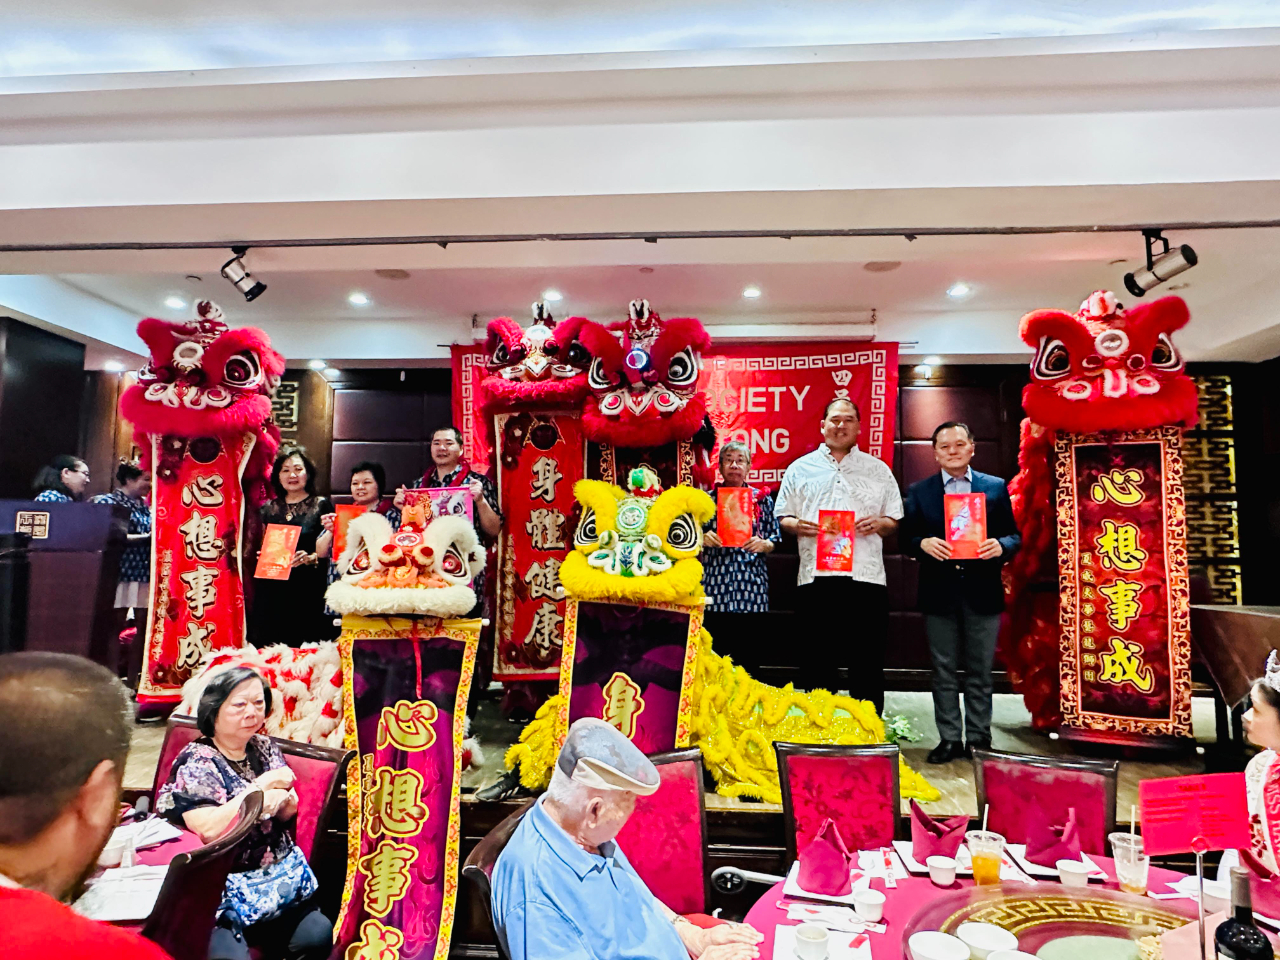 
Director General Richard Lin has a group photo with President Ken Po Lock of See Yup Benevolent Society, President Tin Shing Chao of Yee Yee Tong and leaders of the Chinese American community at the banquet on June 11, 2023.
